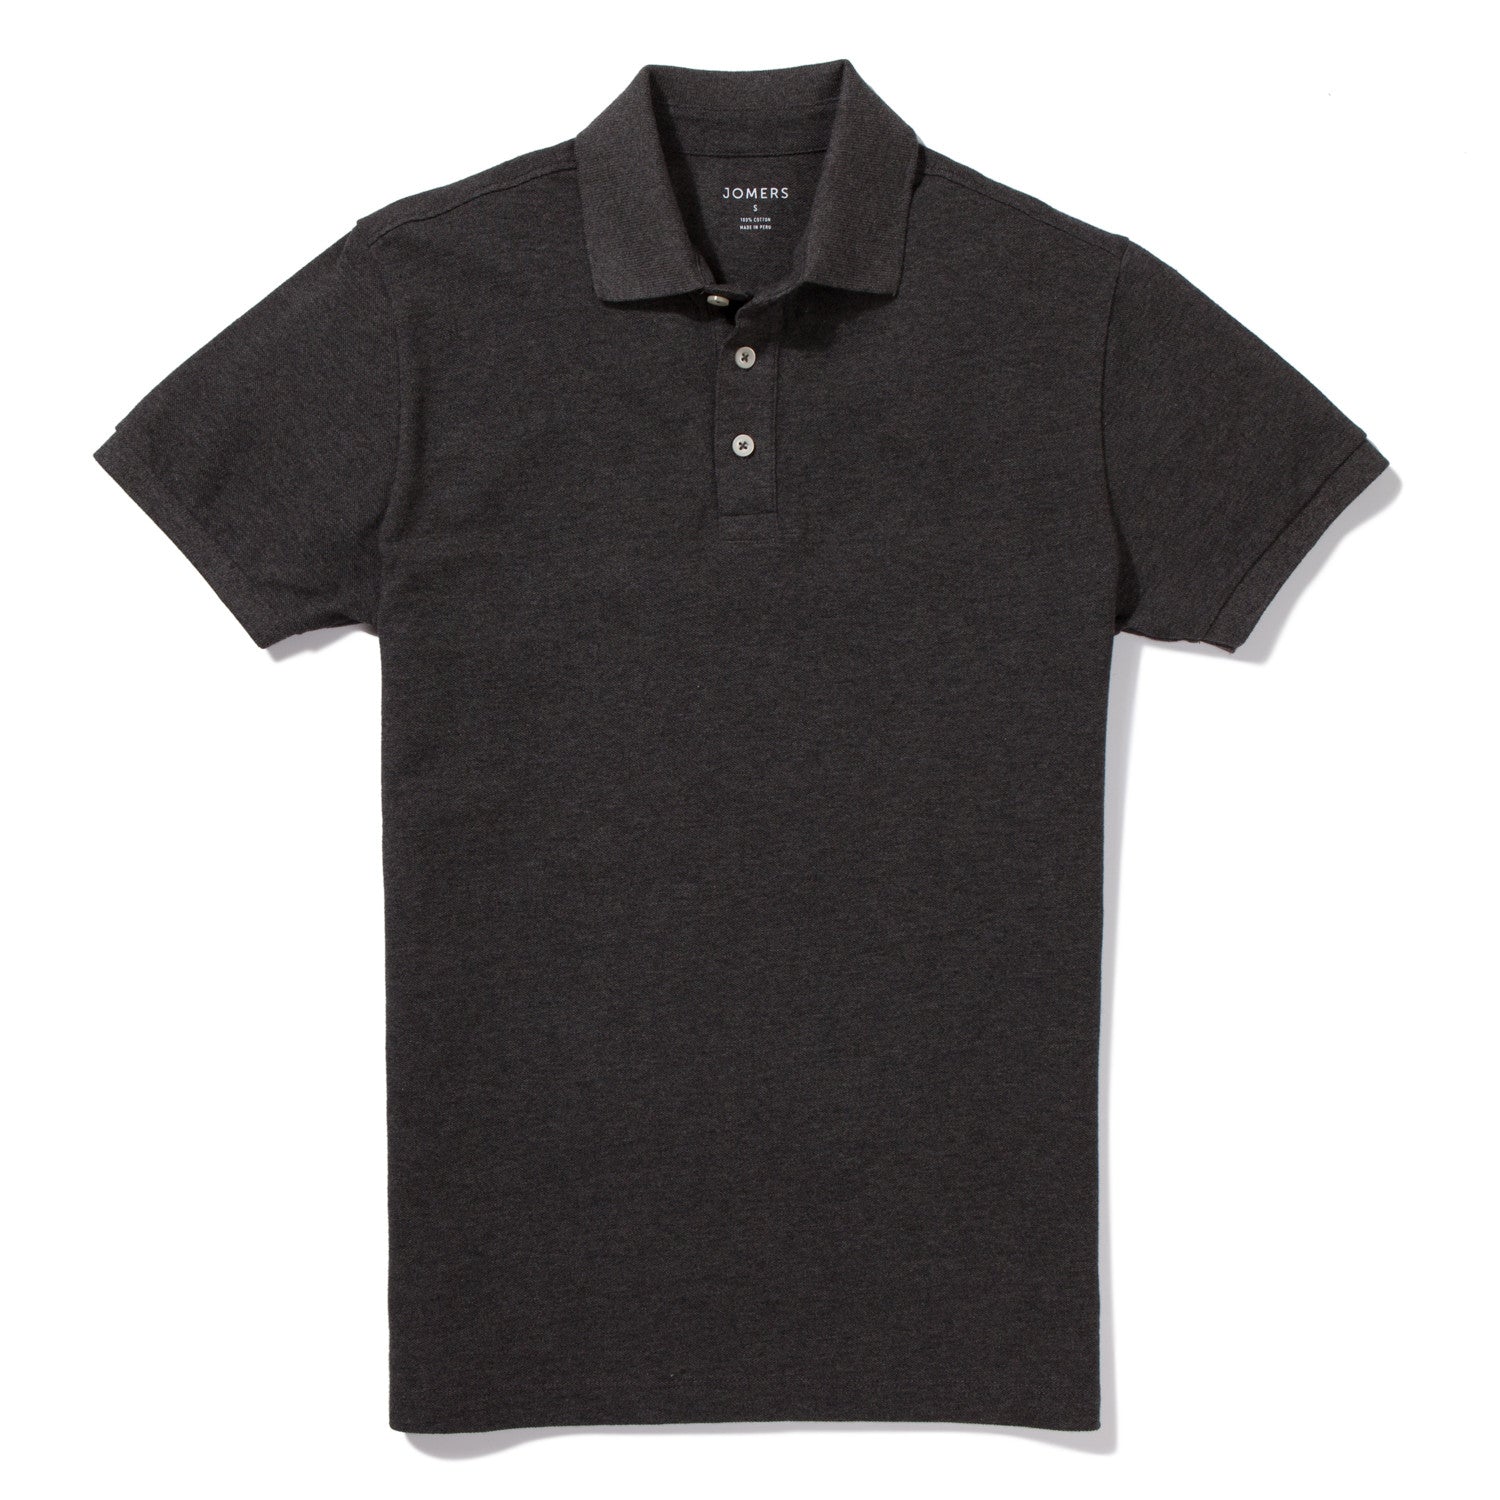 Wentworth - Heather Charcoal Pique Polo - Jomers